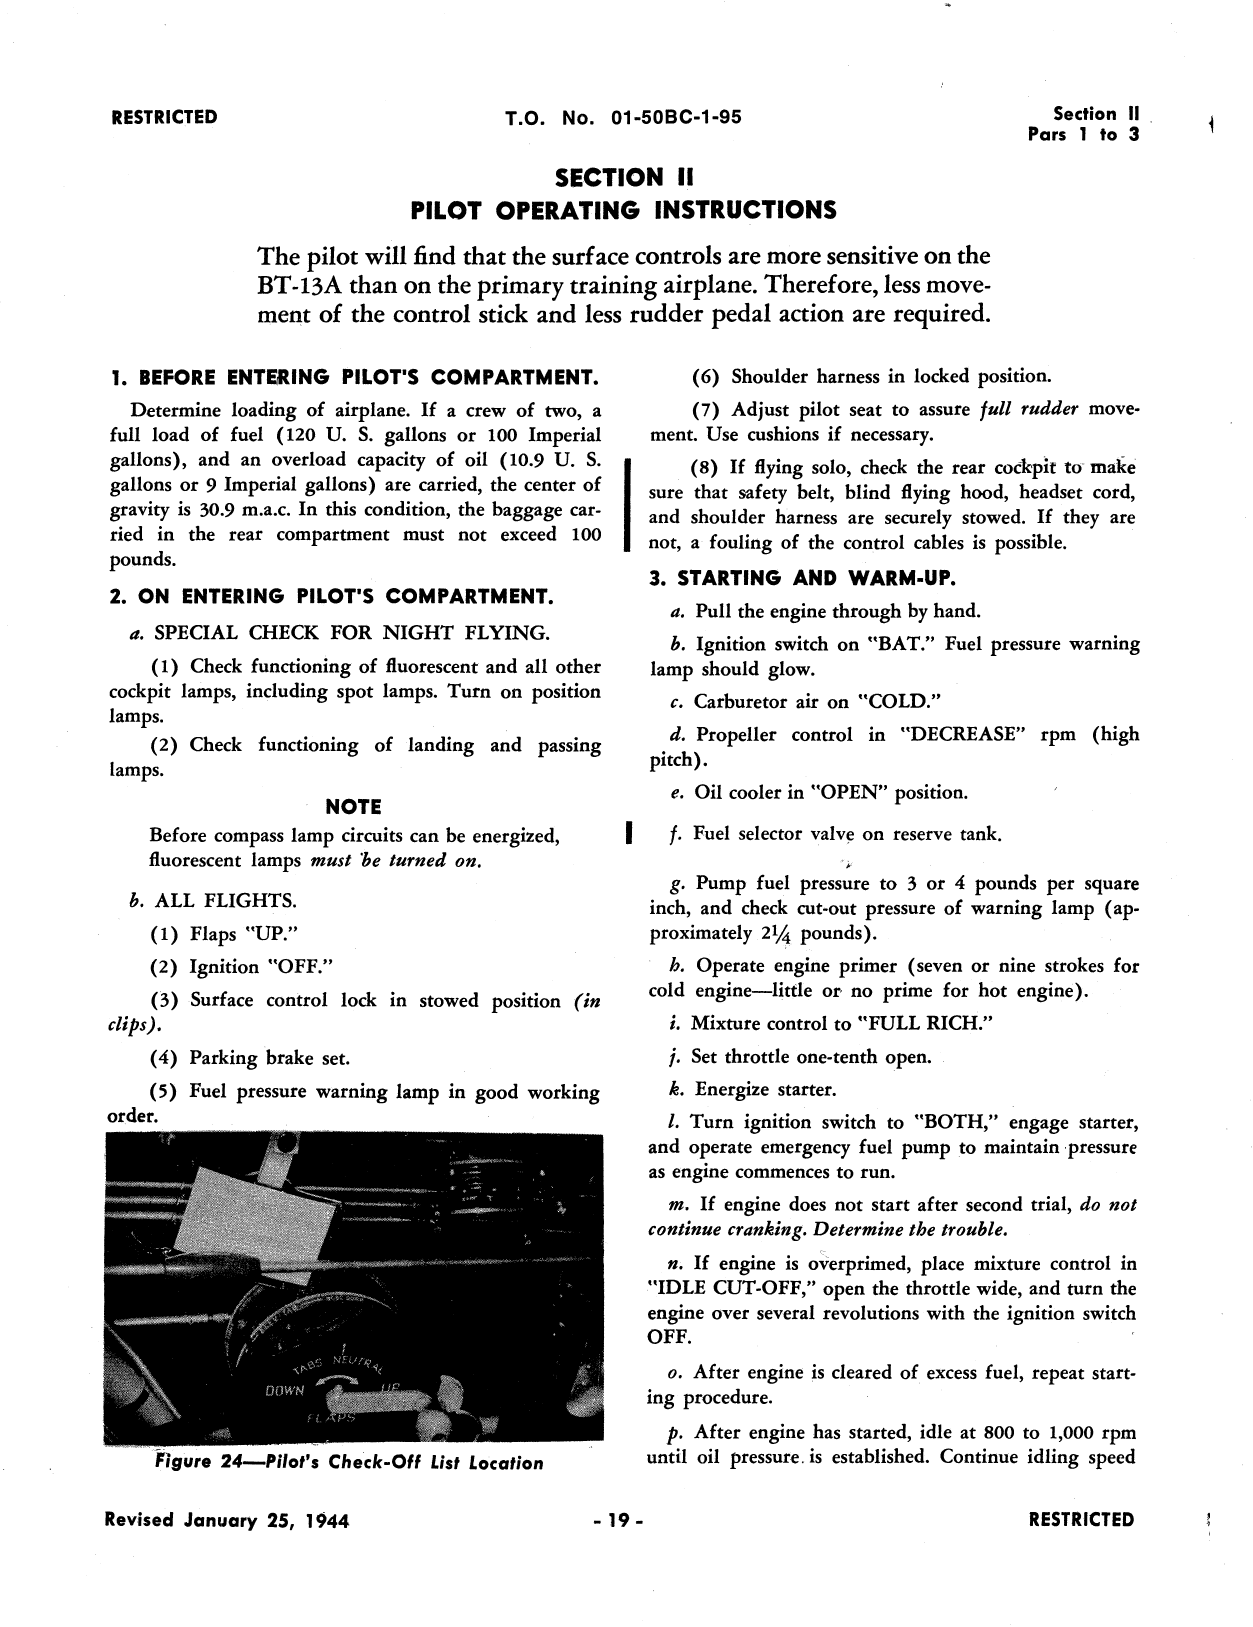 Sample page 24 from AirCorps Library document: Pilot's Handbook - BT-13